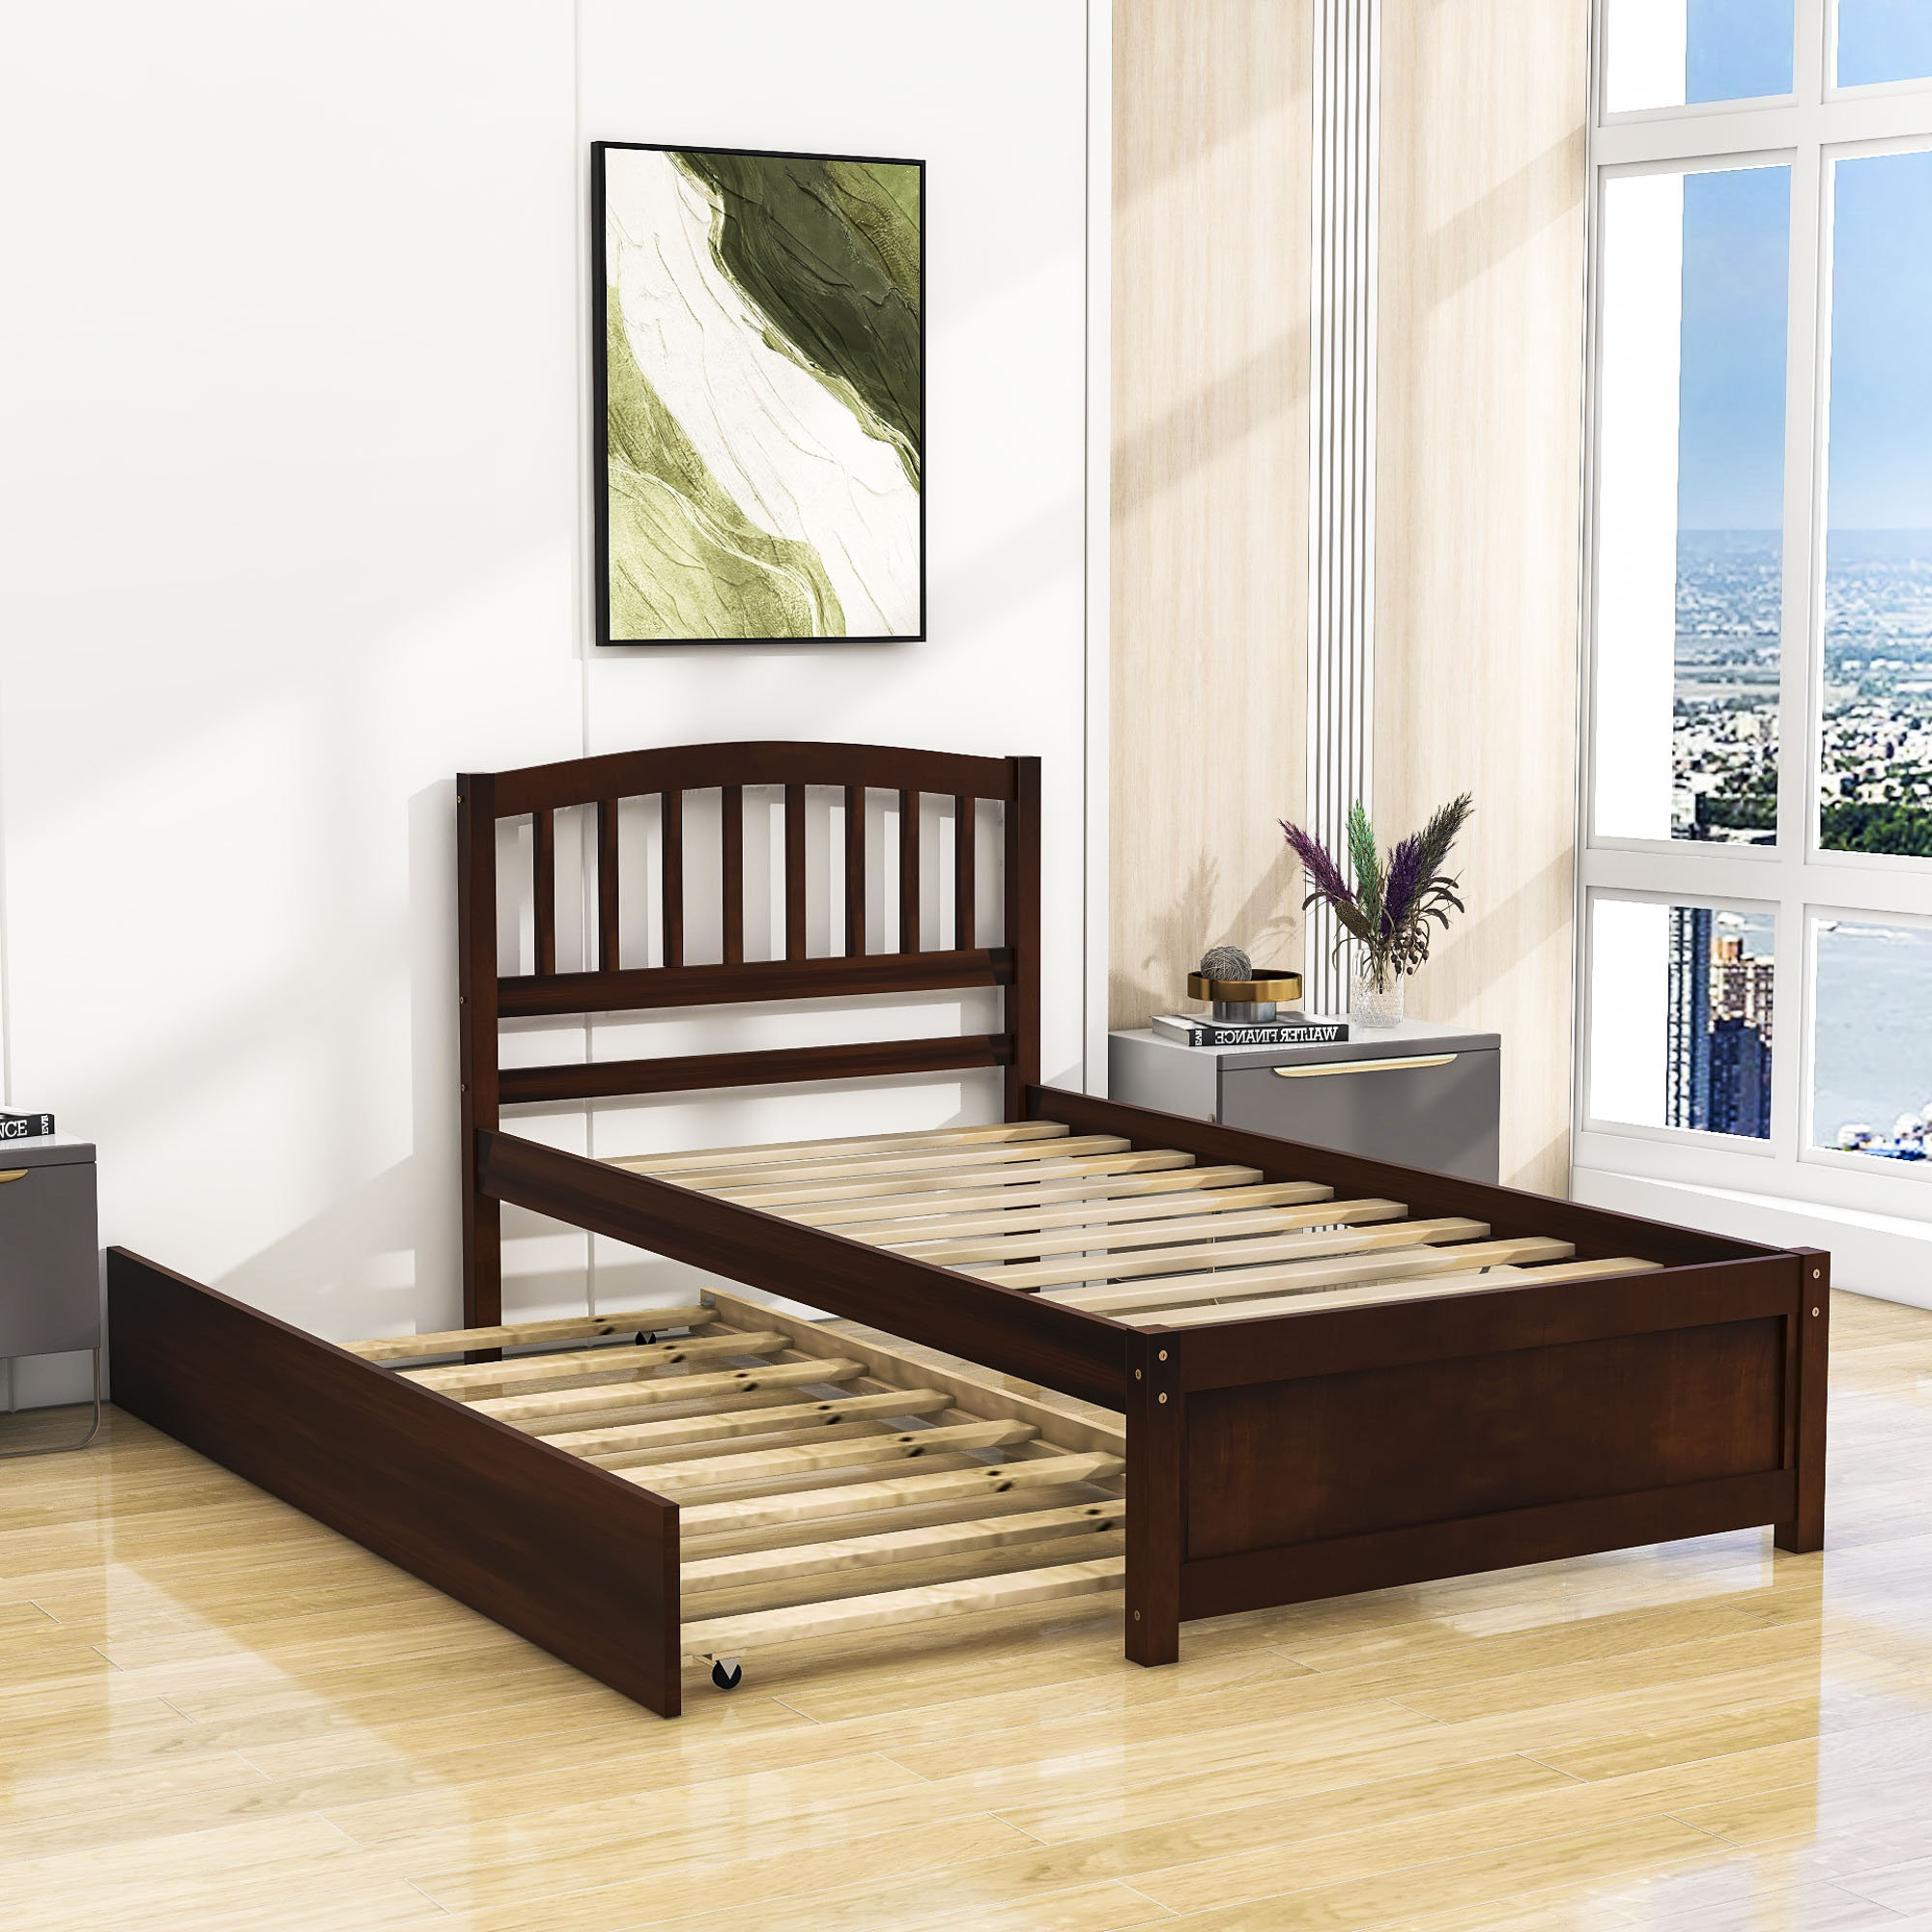 URTR Espresso Twin Size Platform Bed Frames, Wood Twin Bed with